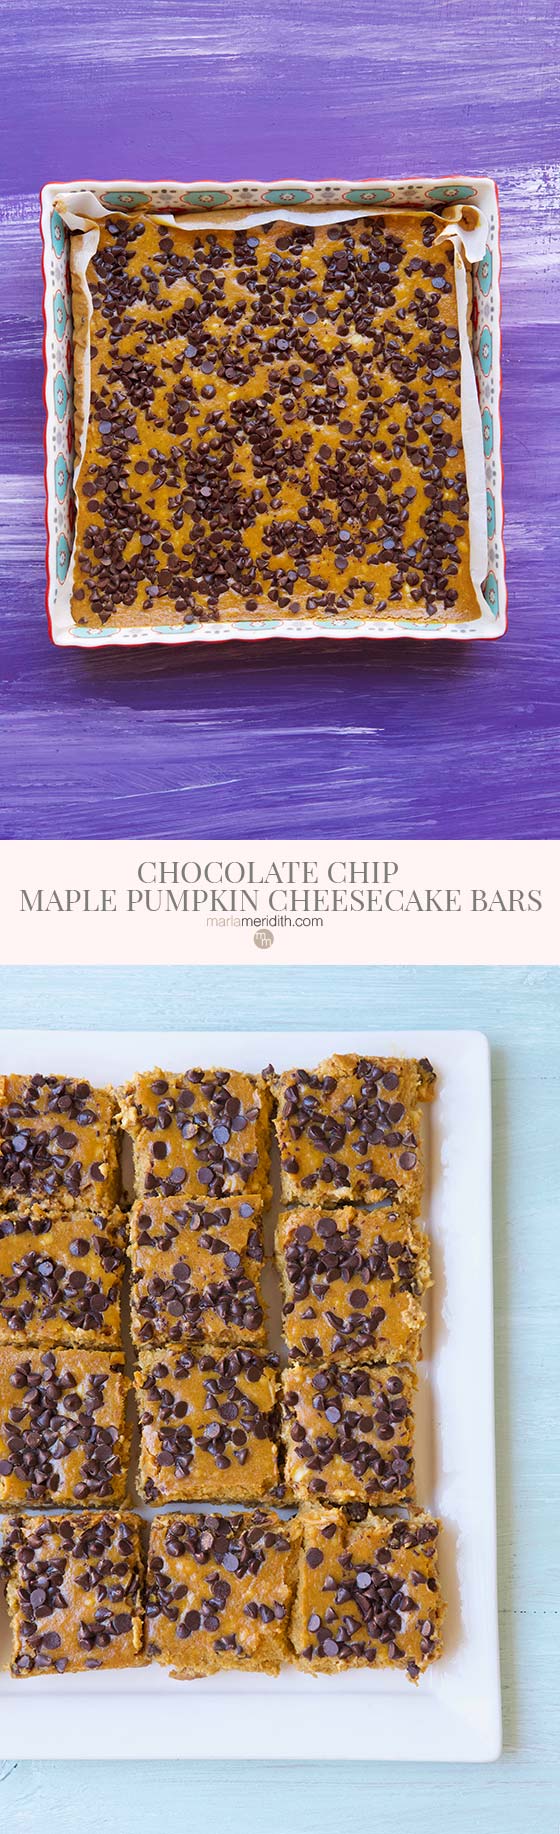 Chocolate Chip Maple Pumpkin Cheesecake Bars are everything a pumpkin lover could wish for and then some! Get the recipe on MarlaMeridith.com